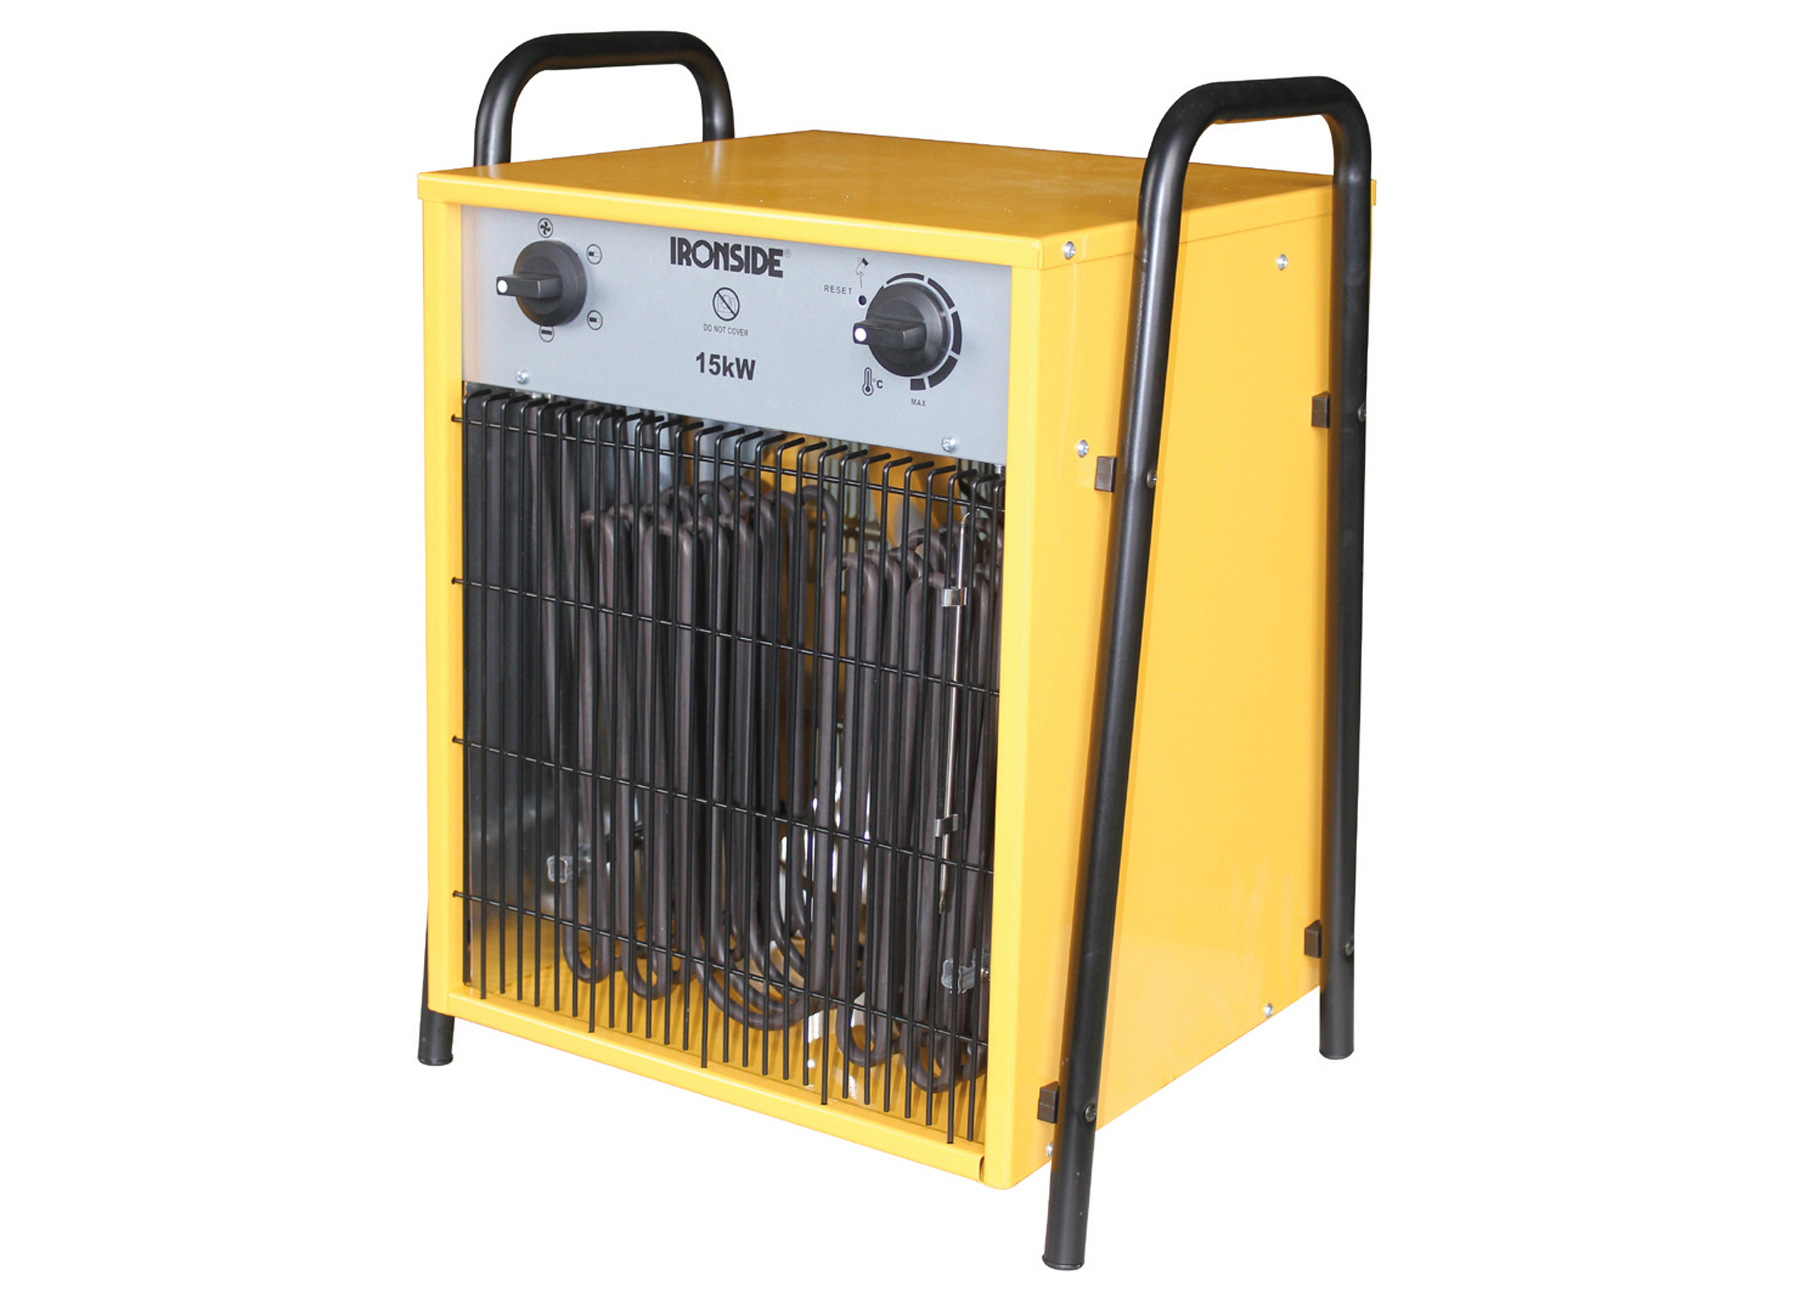 IRONSIDE VERWARMING 15KW THERMOSTAAT - 3 FASES